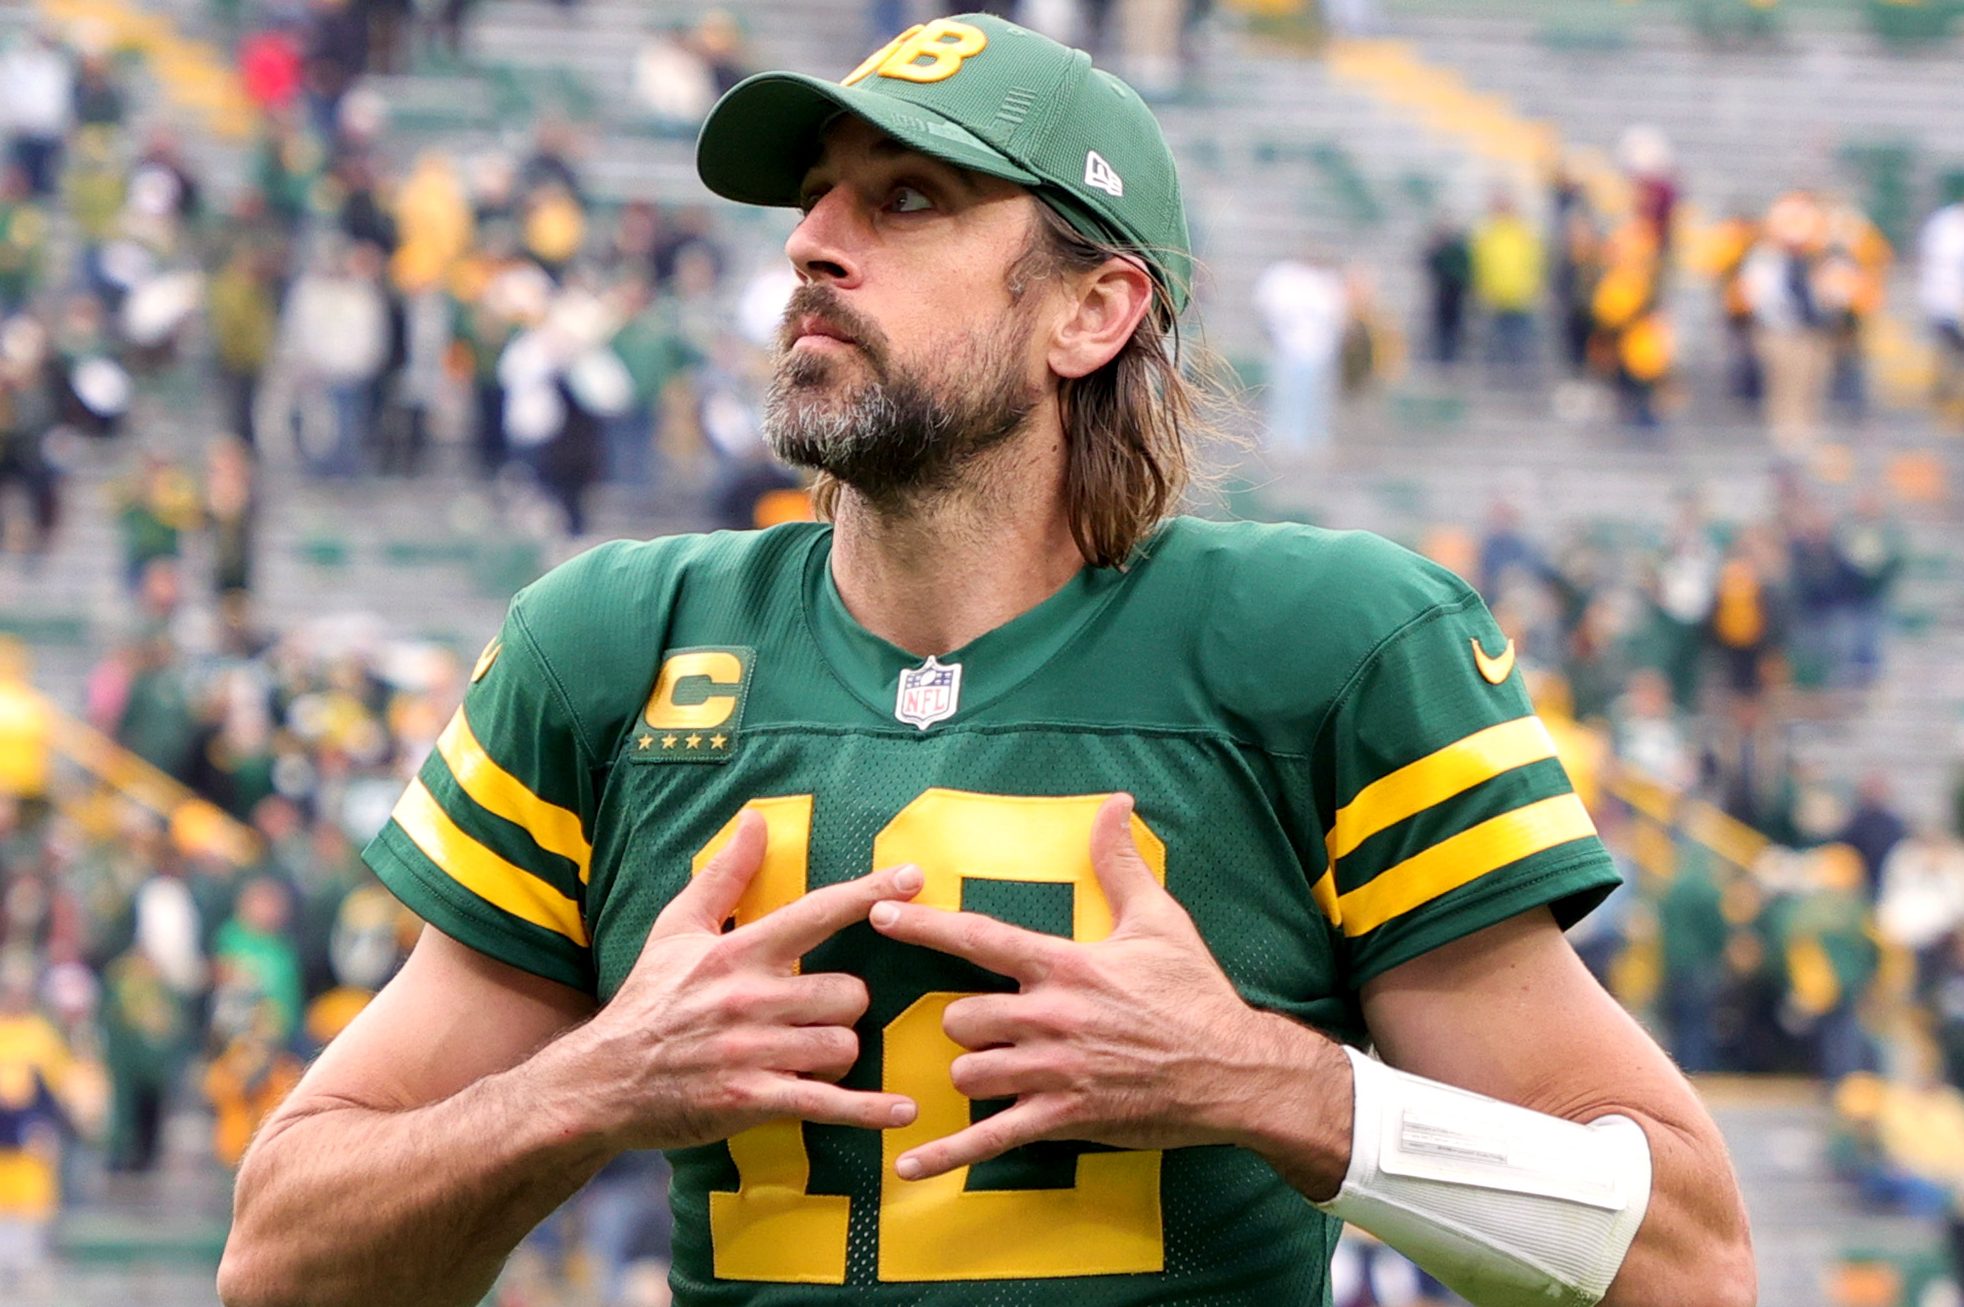 Aaron Rodgers of the Green Bay Packers celebrates after beating Washington